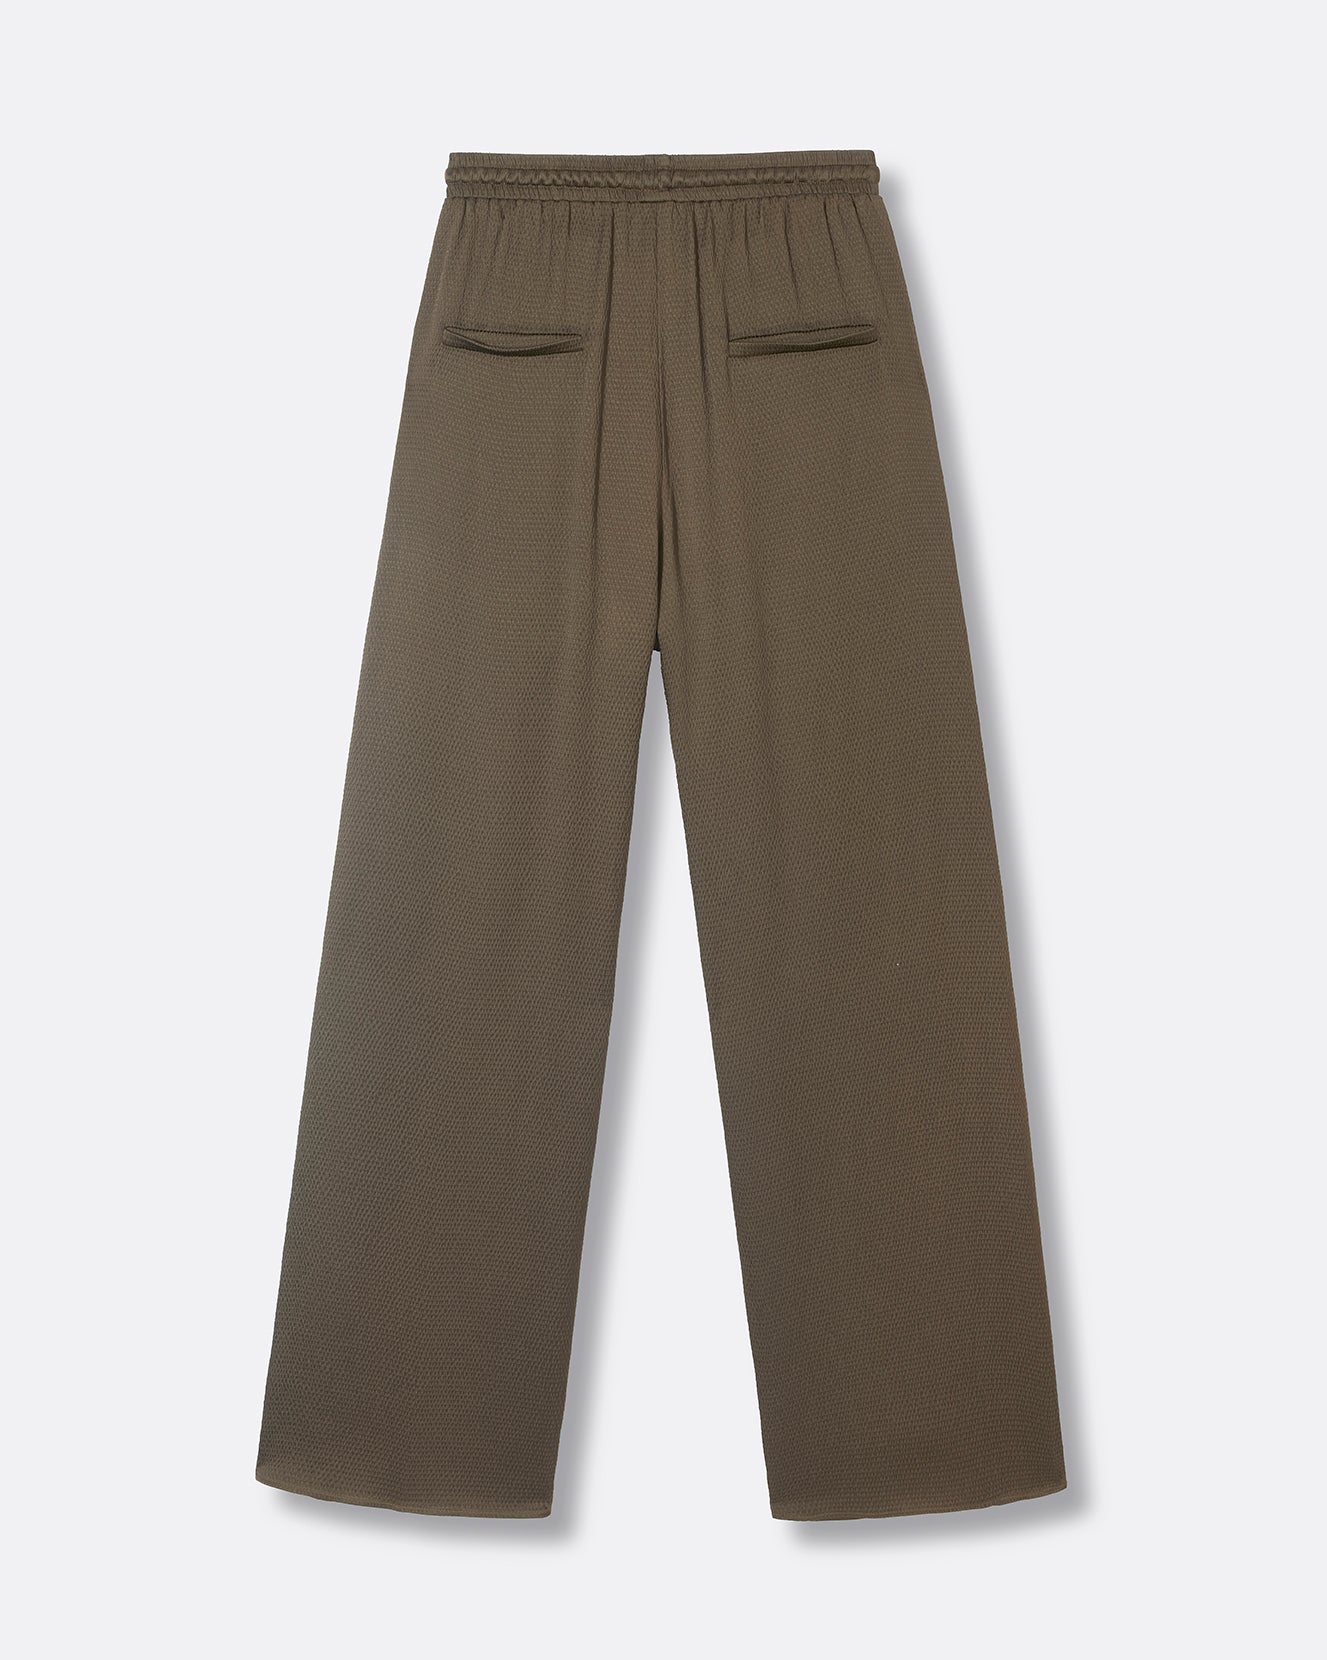 Cleo satin trousers - Olive